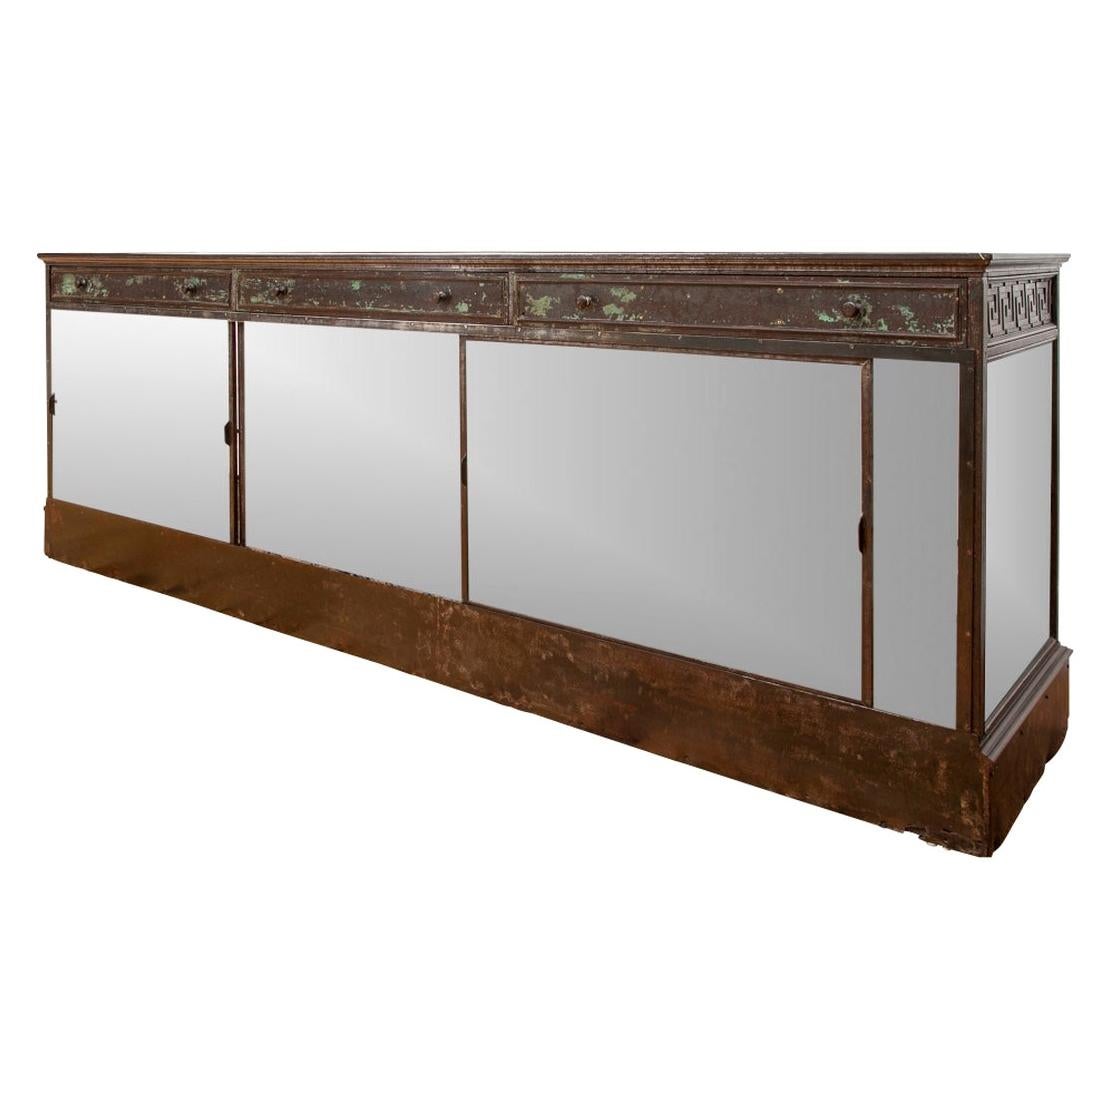 Massive and Notable Industrial Era Antique Shop Counter/ Display Case